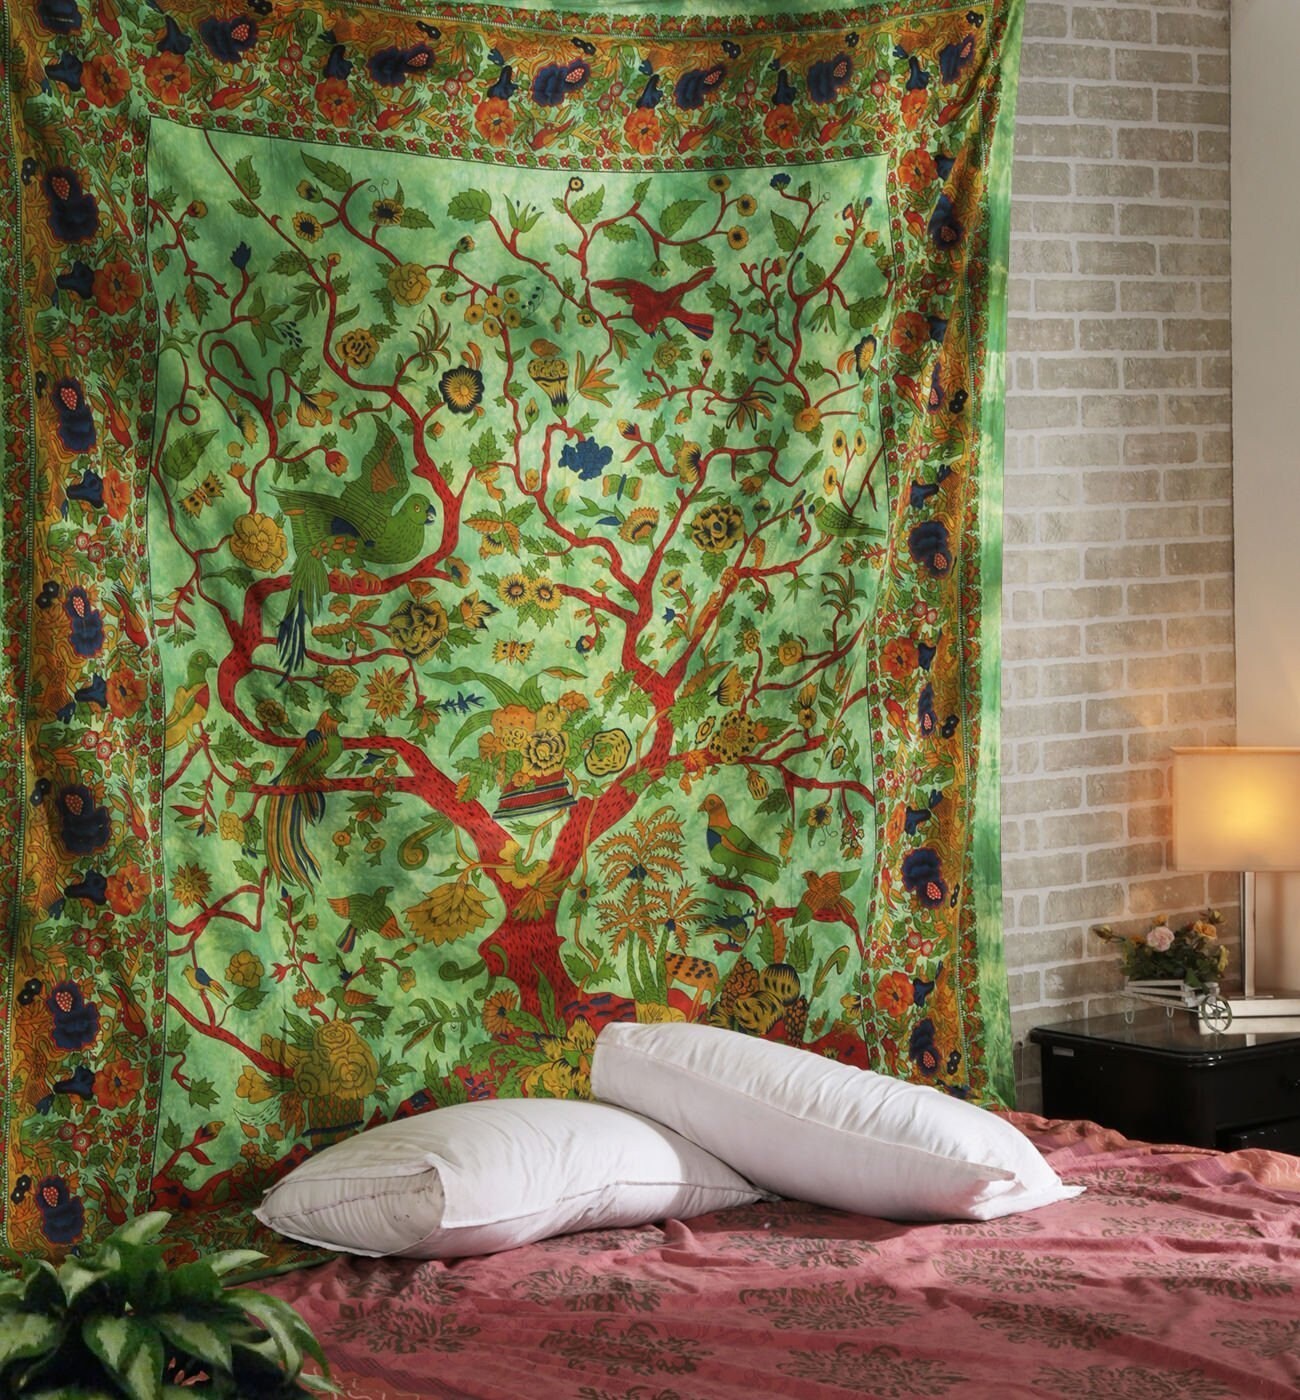 Tree of Life Indian Mandala Wall Hanging Hippie Cotton Bedspread Twin Tapestry 